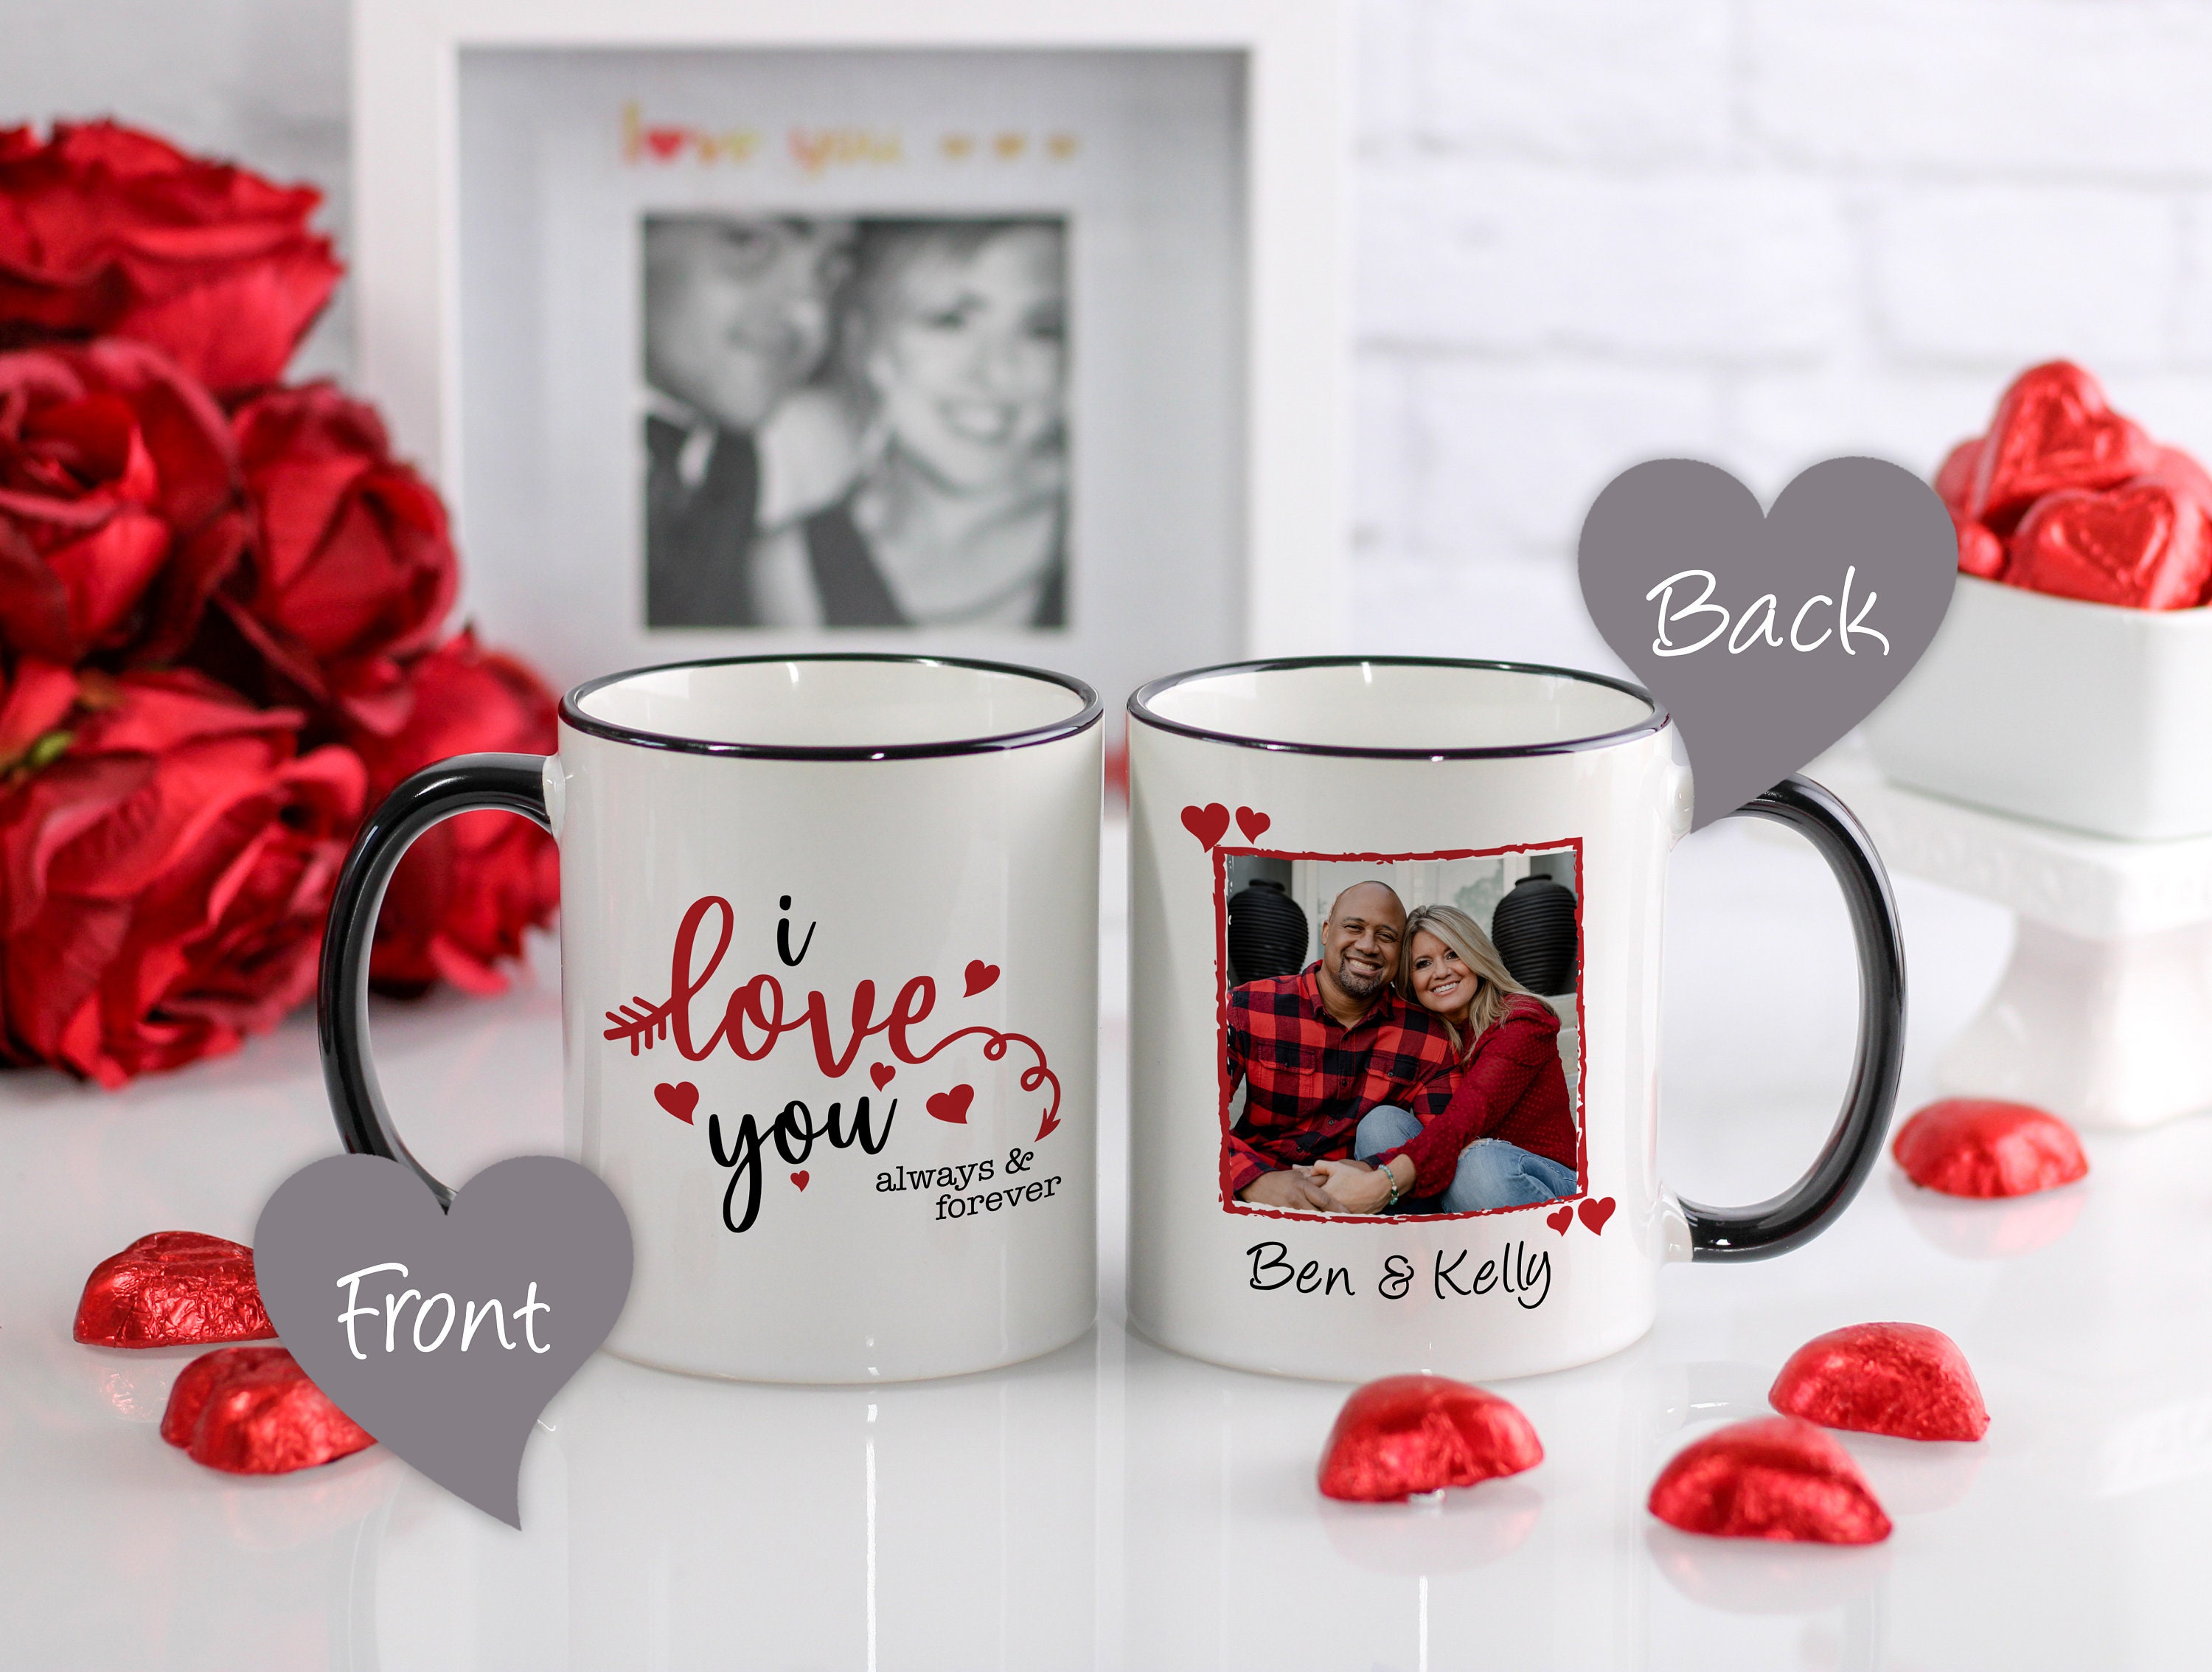 Valentine's Day Gift Guide - Mom Edition - COFFEE AND DENIM